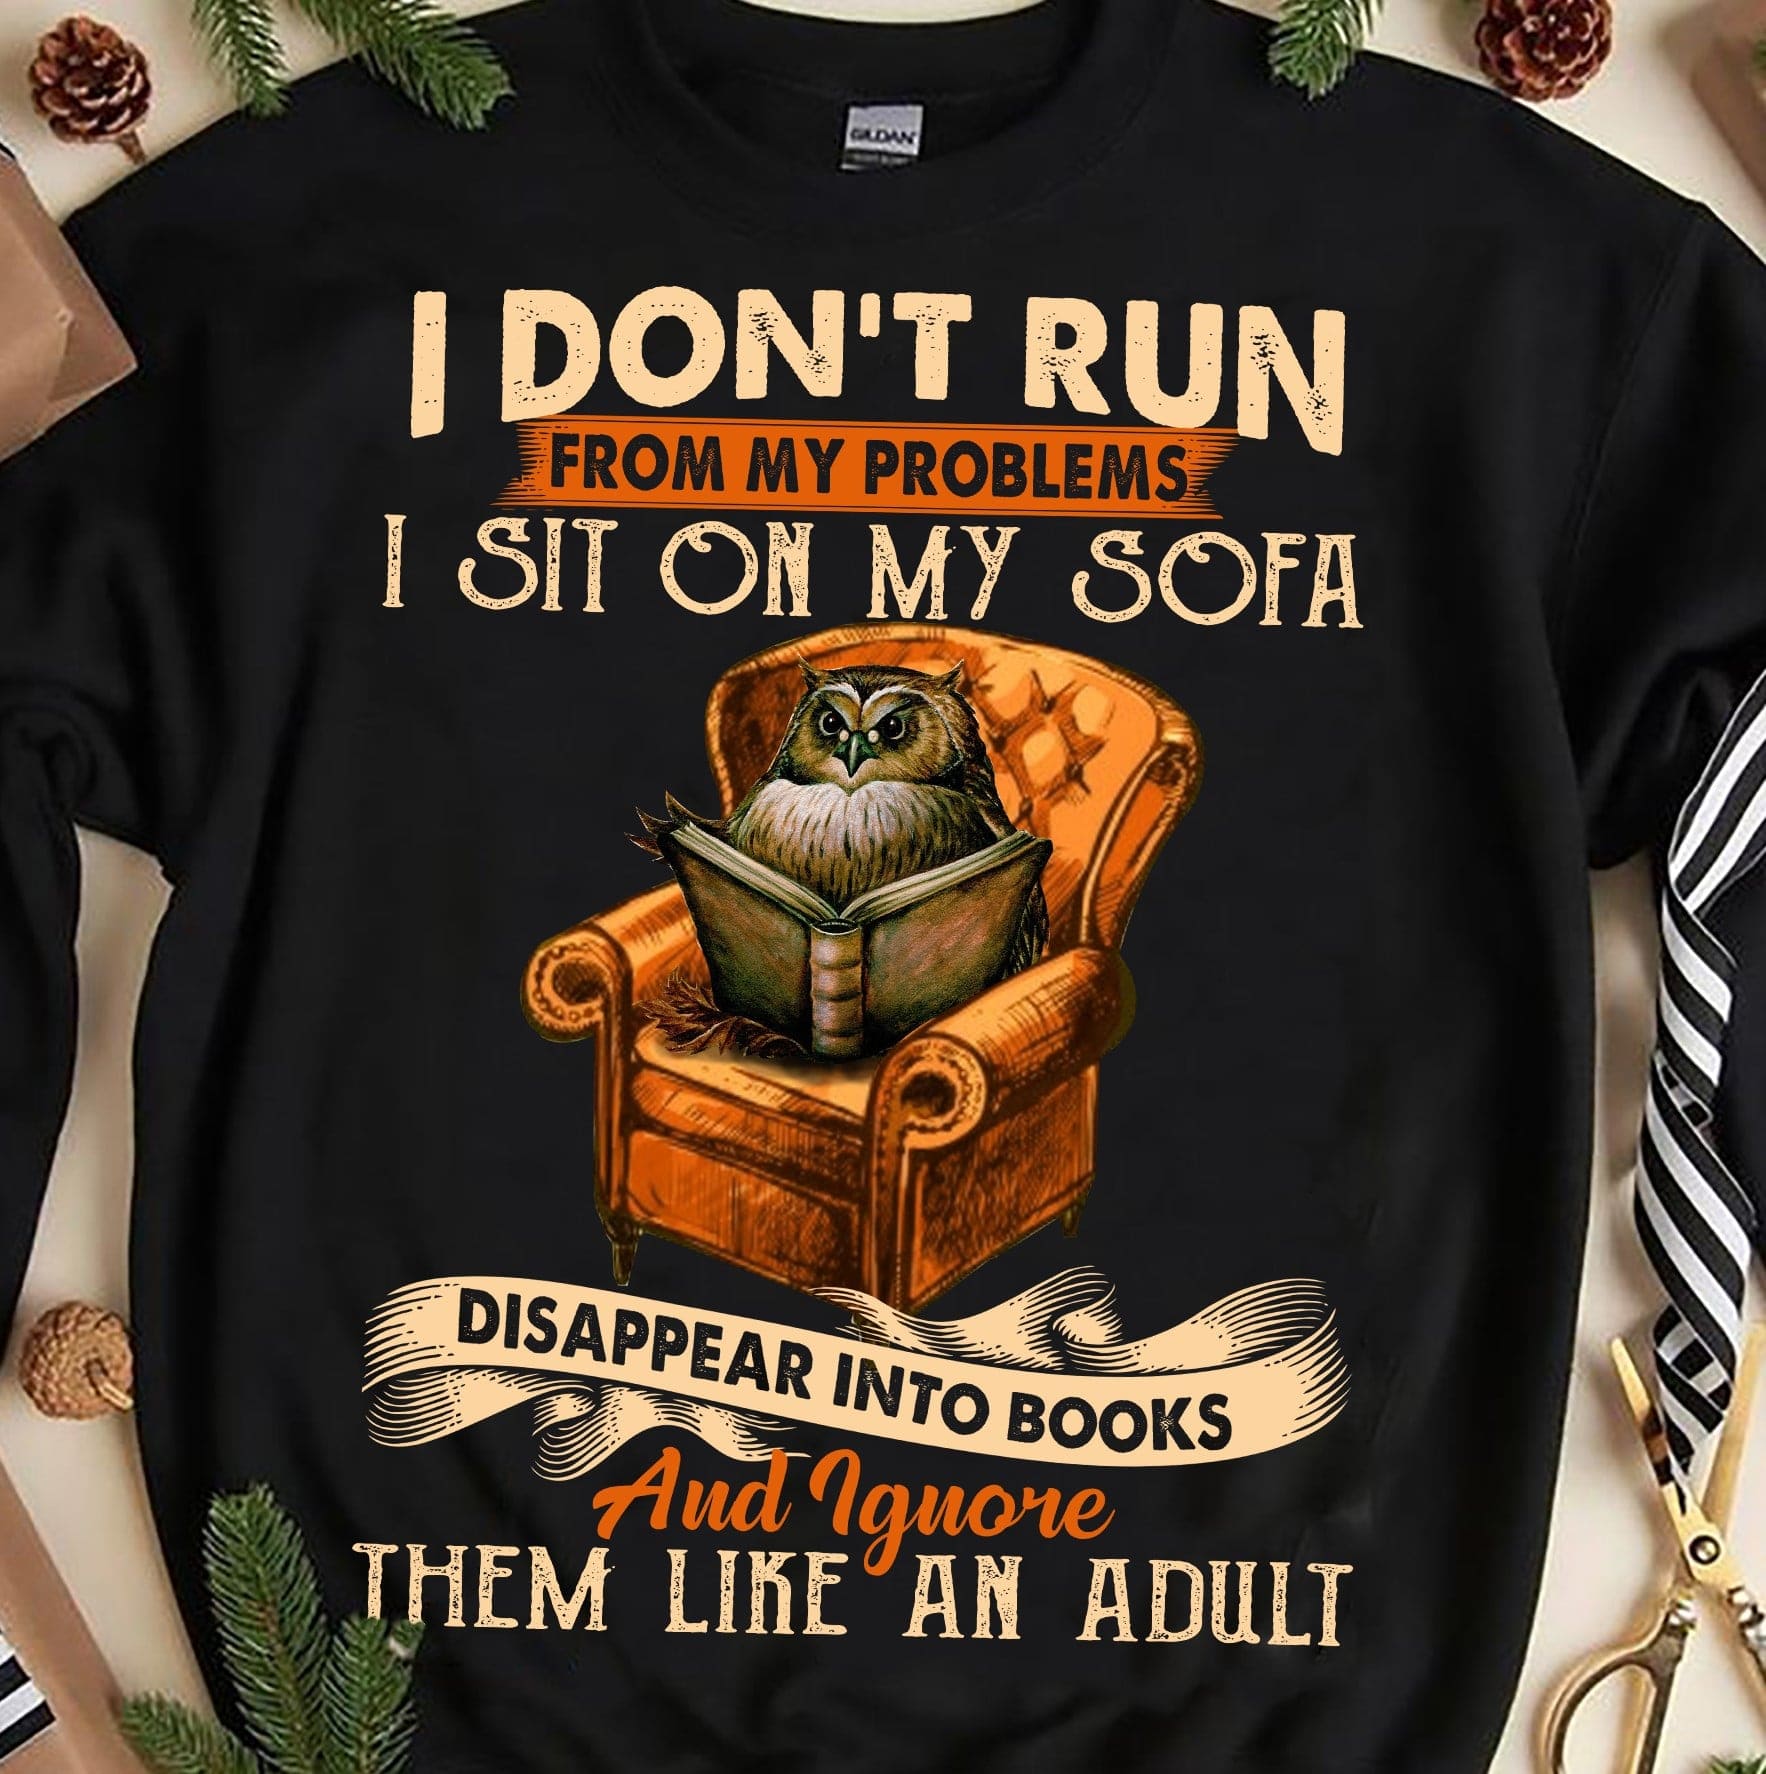 Owl Book - I don't run from my problems i sit on my sofa disappear into books and ignore them like an adult